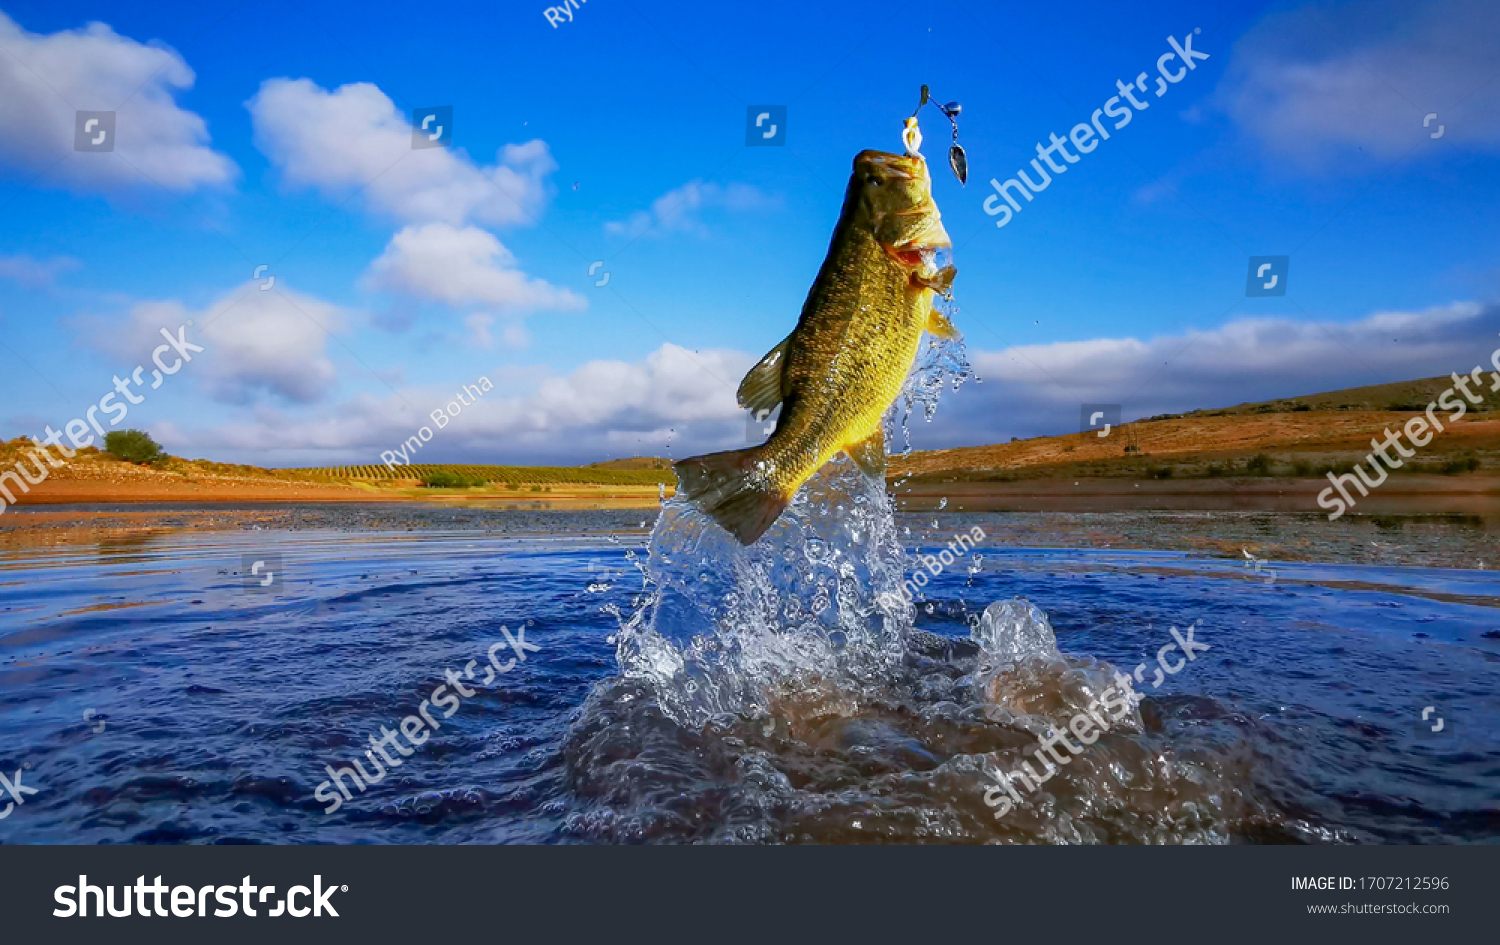 Big Bass Large mouth - Fishing on lake with blue sky at dawn, sunrise #1707212596